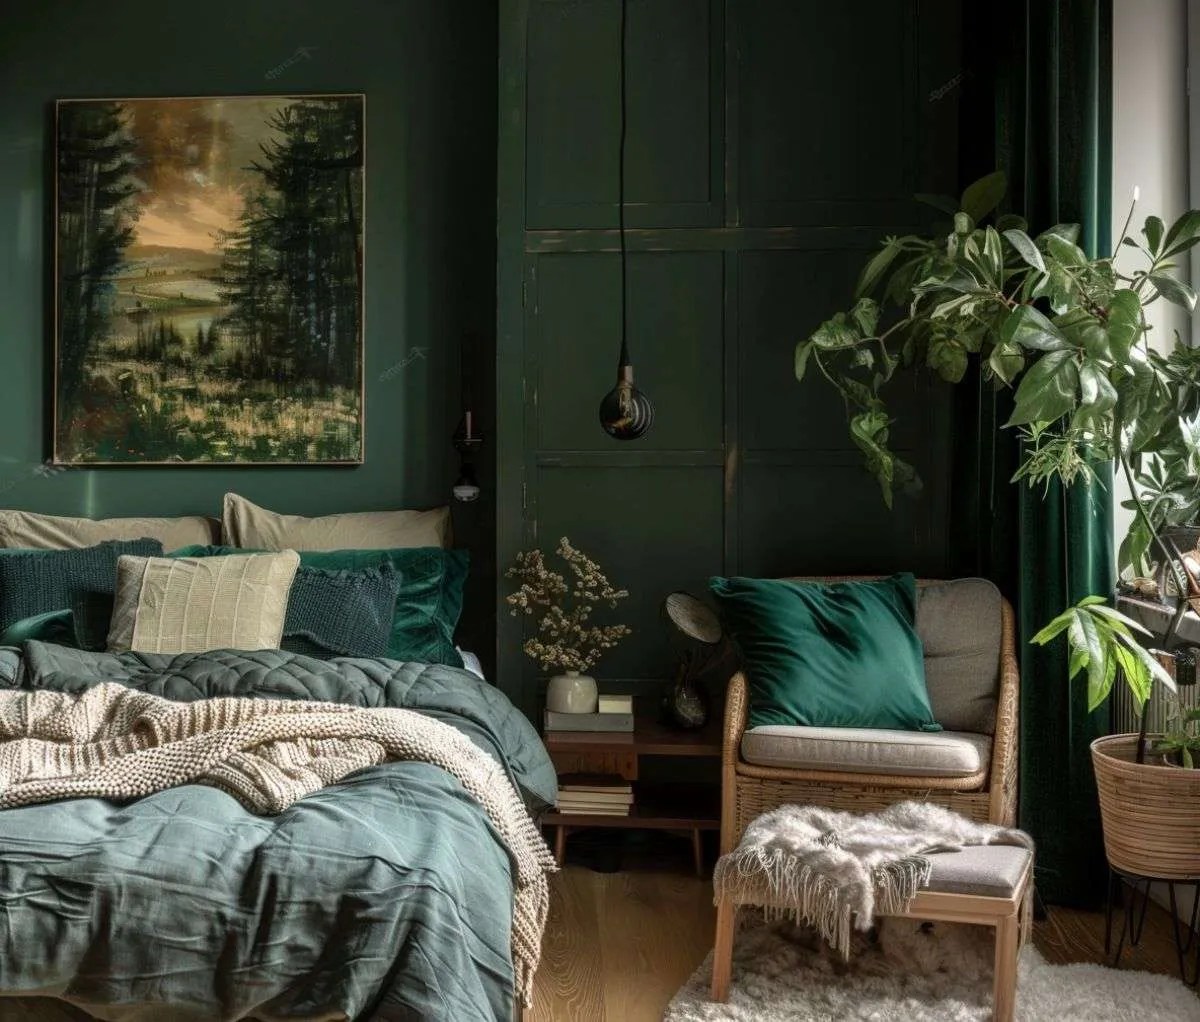 Dark Green Bedroom Ideas – 10 Tips for Designing a Tranquil Space